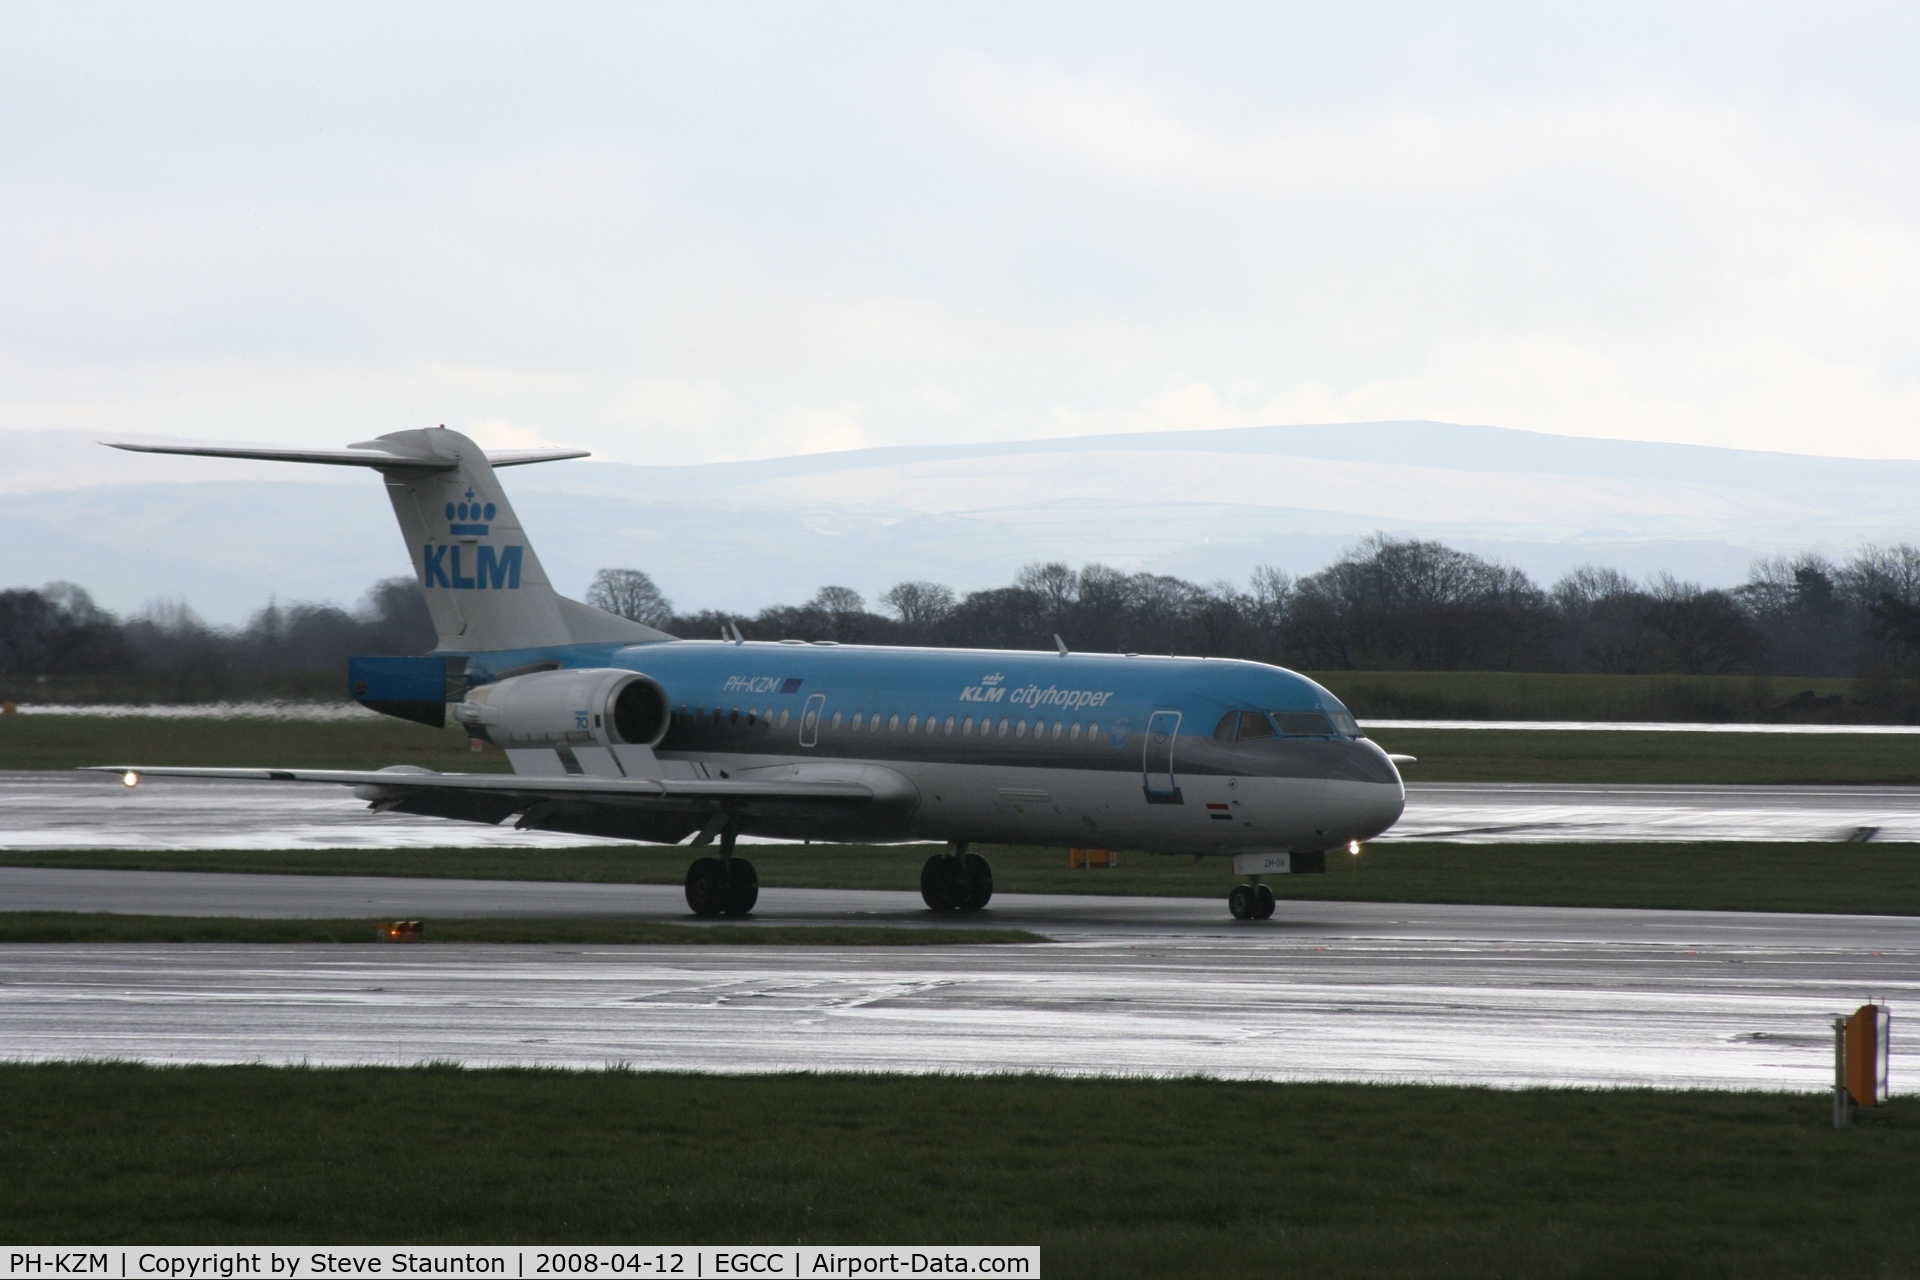 PH-KZM, 1995 Fokker 70 (F-28-0070) C/N 11561, Taken at Manchester Airport on a typical showery April day